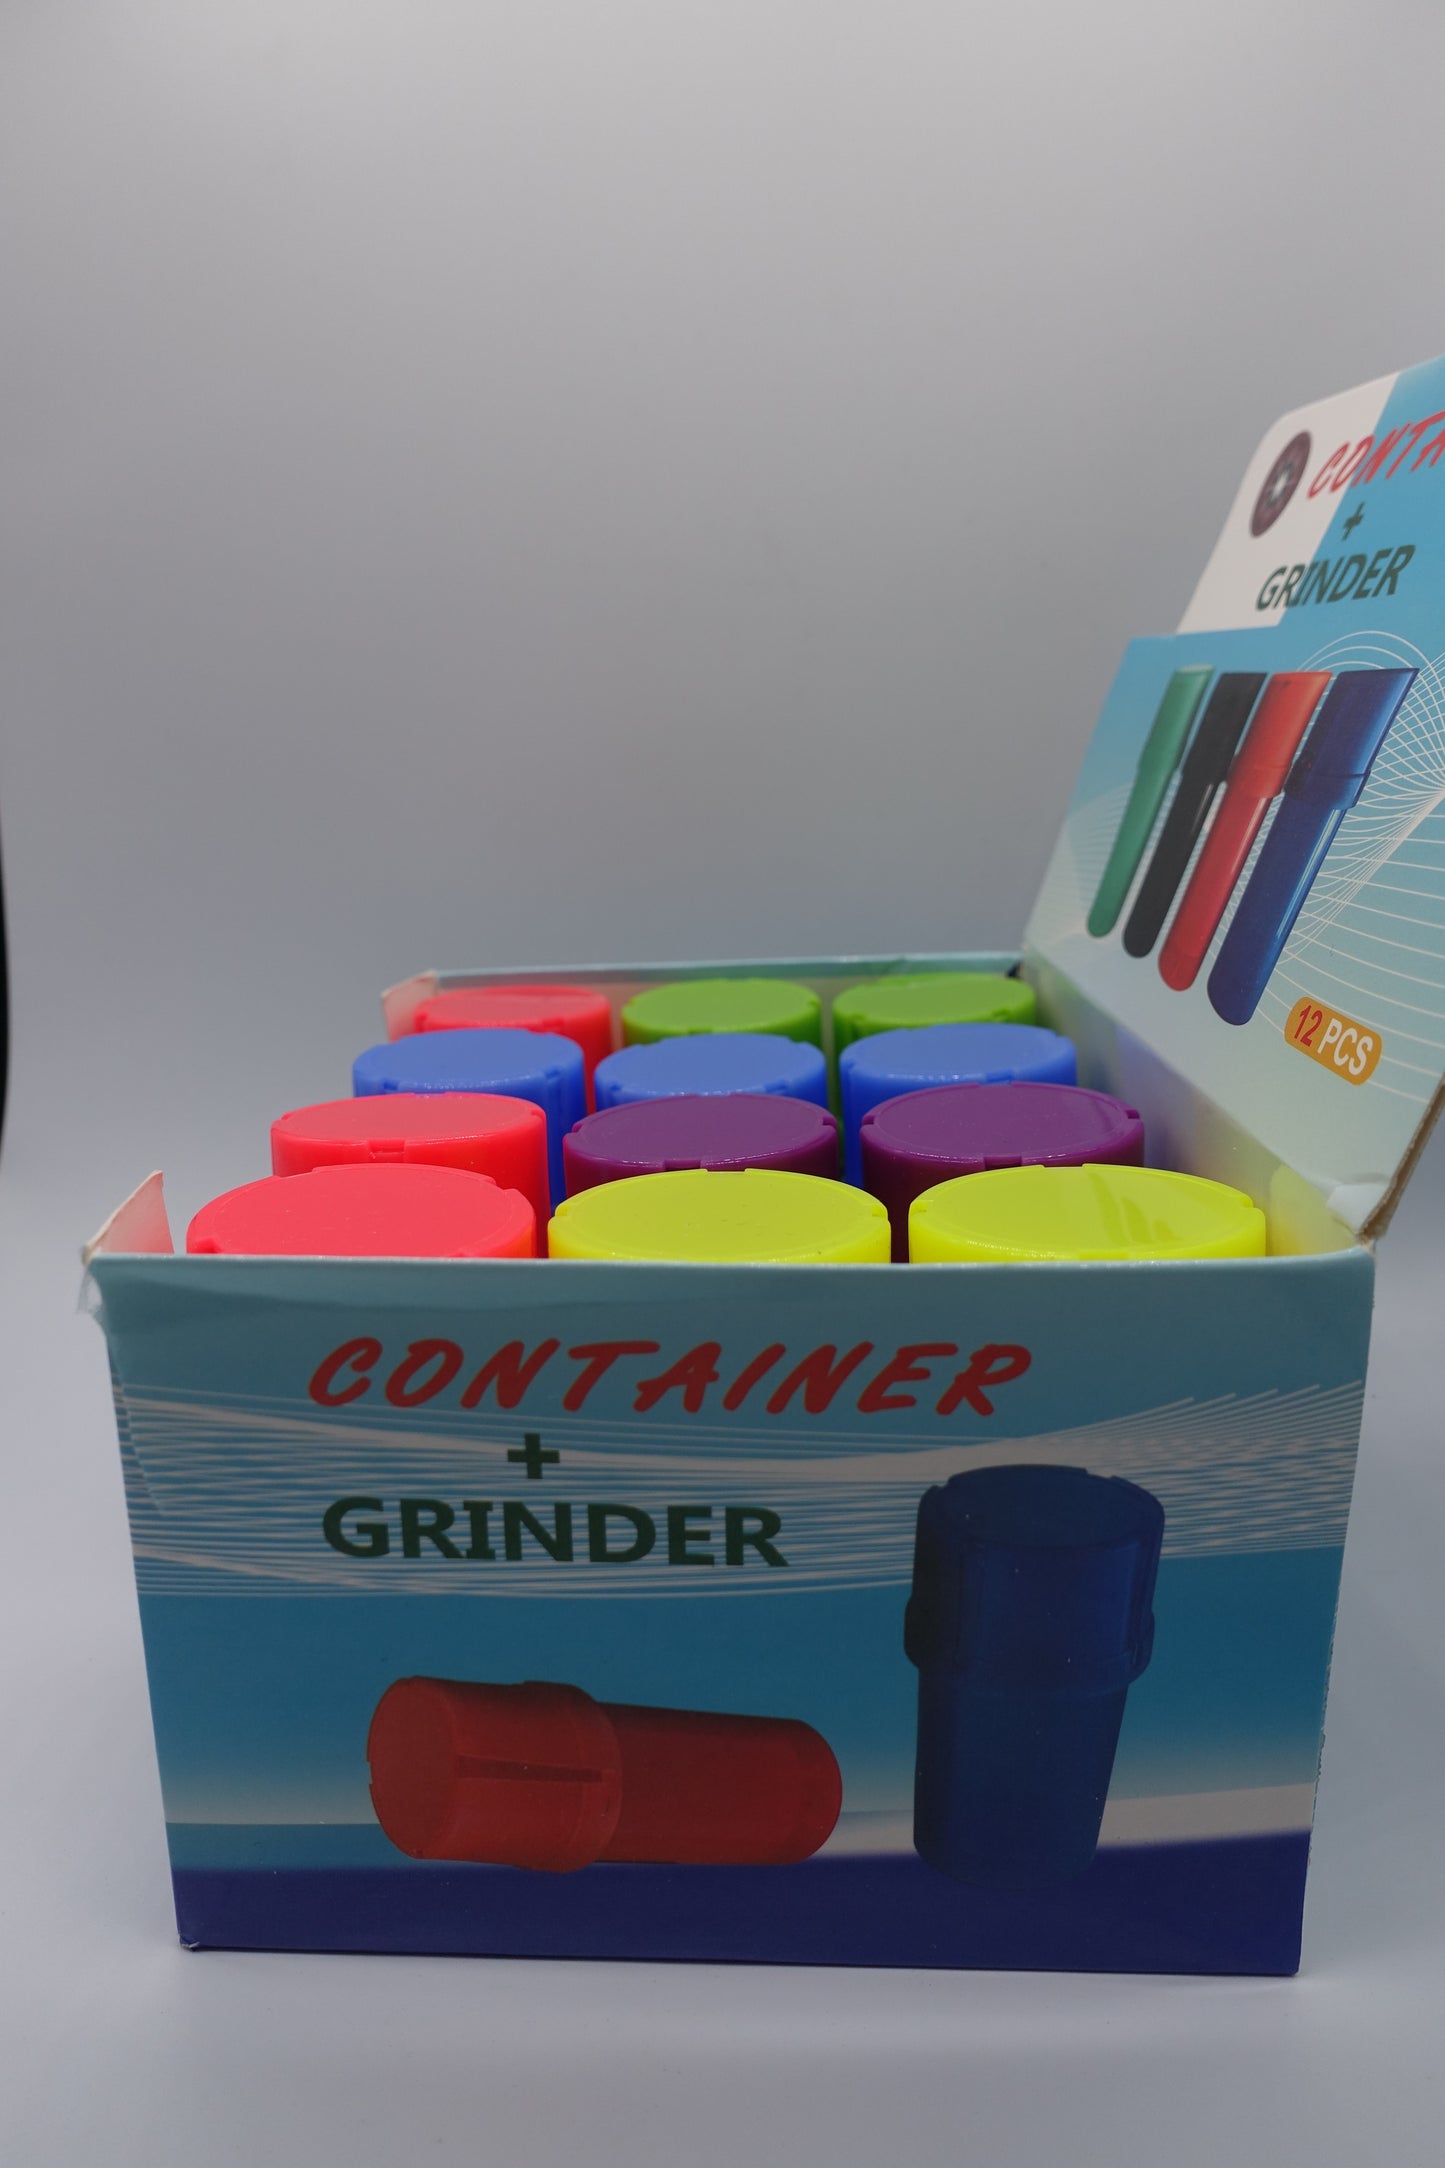 CONTAINER + GRINDER LARGE